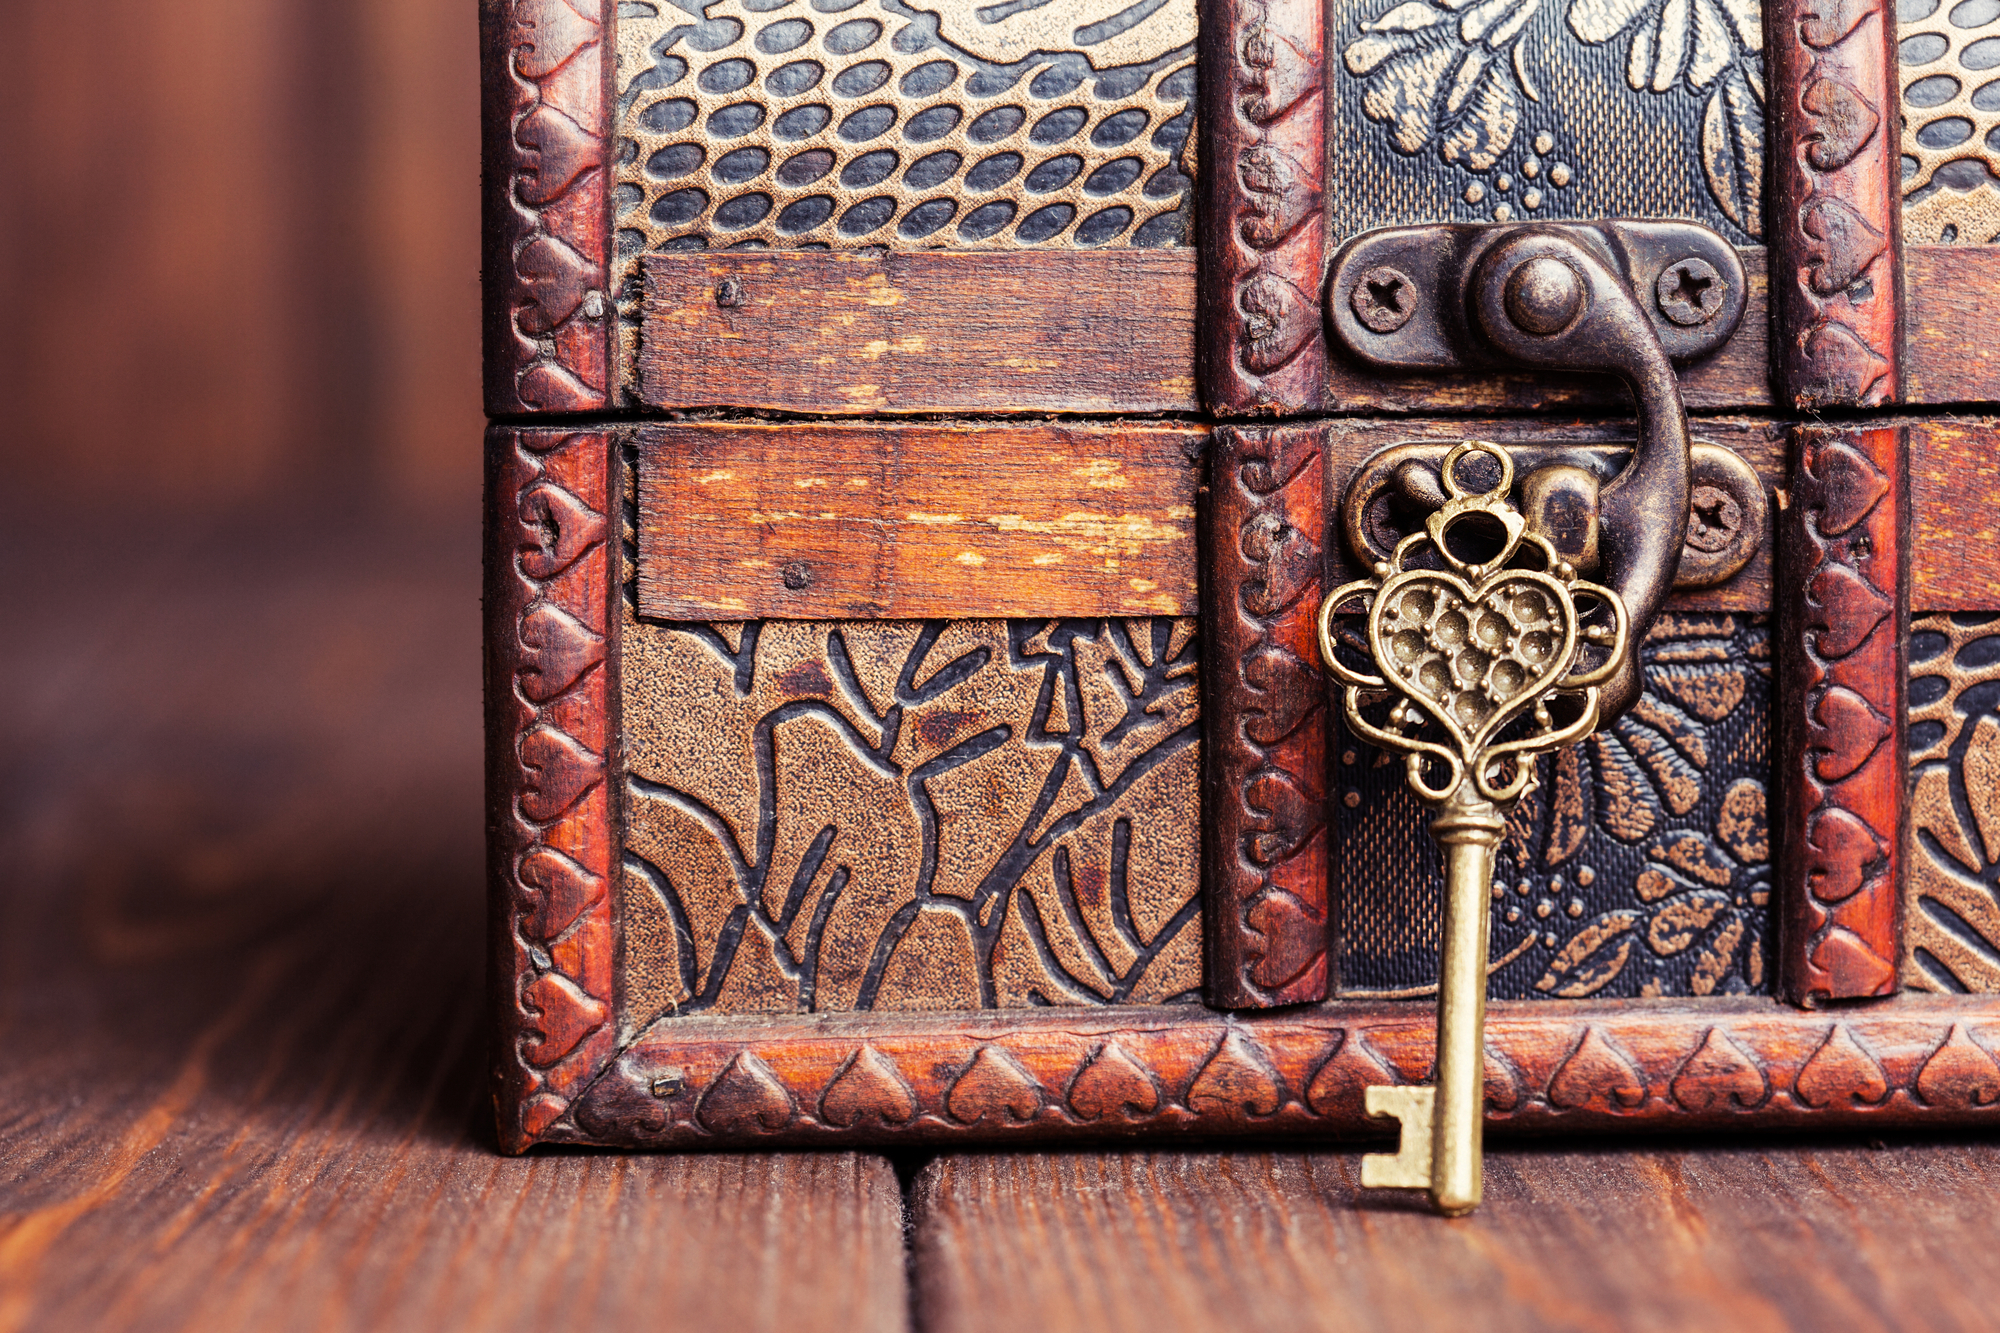 Vintage key and old treasure chest